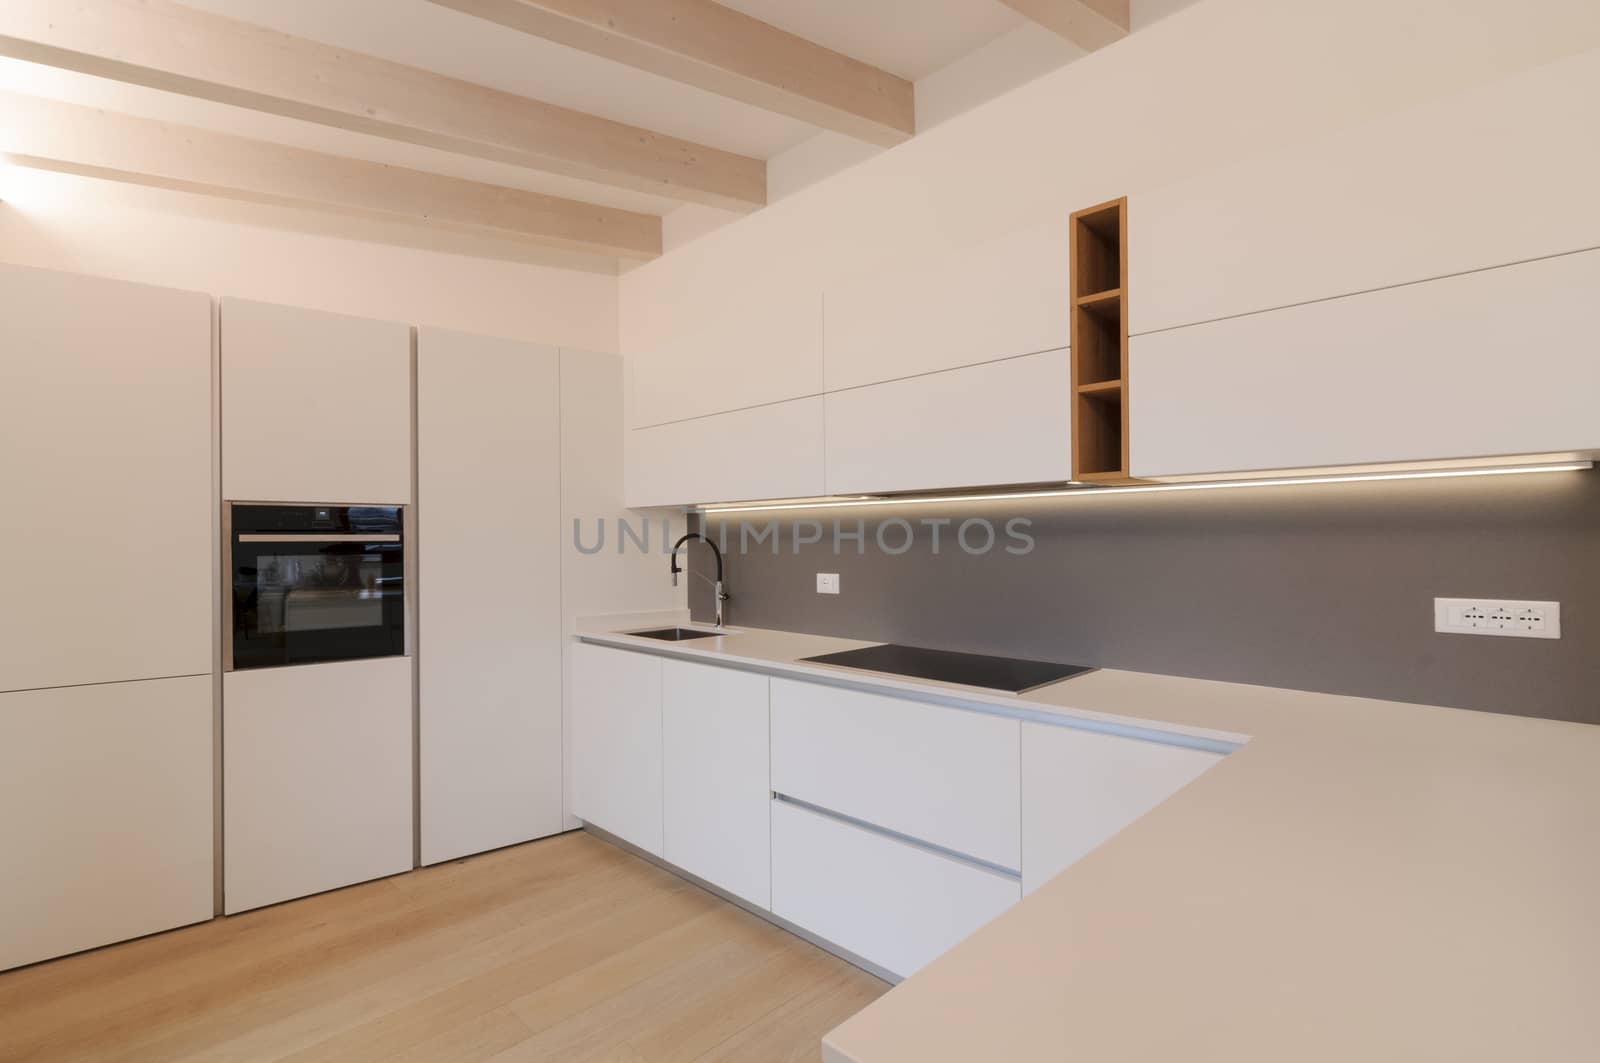 Modern and elegant kitchen interior with white cabinets, induction hob and wooden inserts. Contemporary Scandinavian style